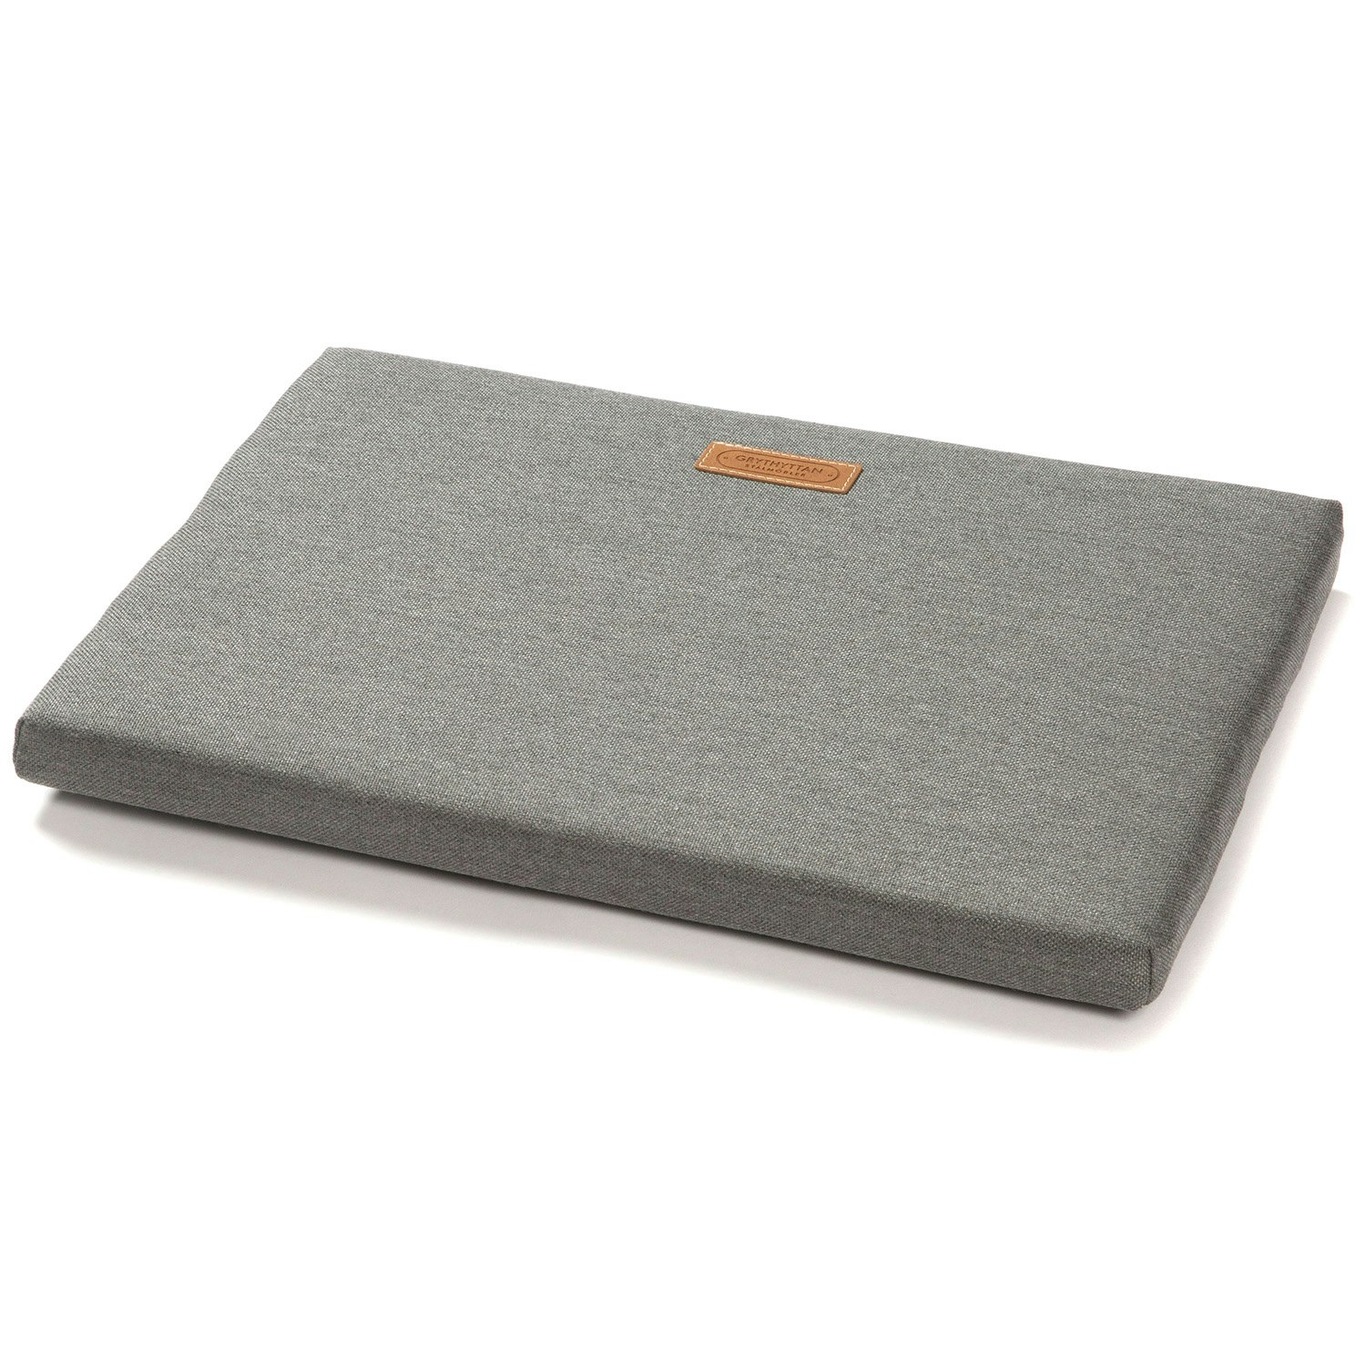 A3 Seat Cushion For Footstool, Grey